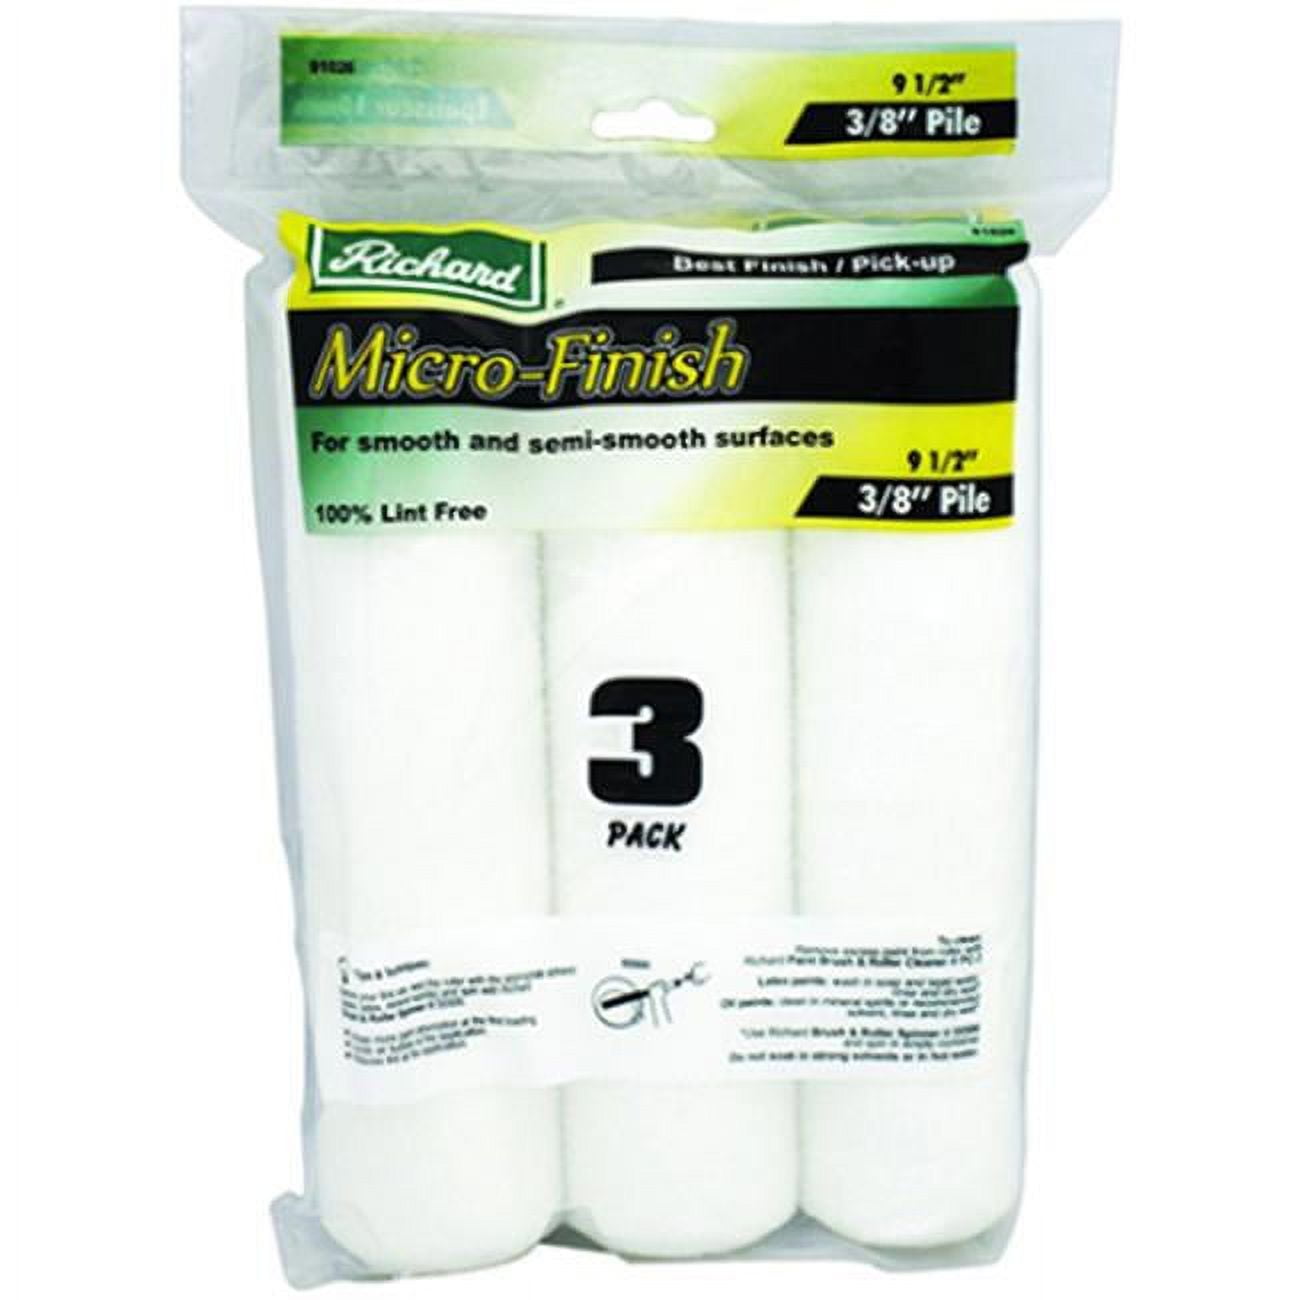 91027-us 9 X 0.37 In. Micro Roller Cover - Pack Of 3